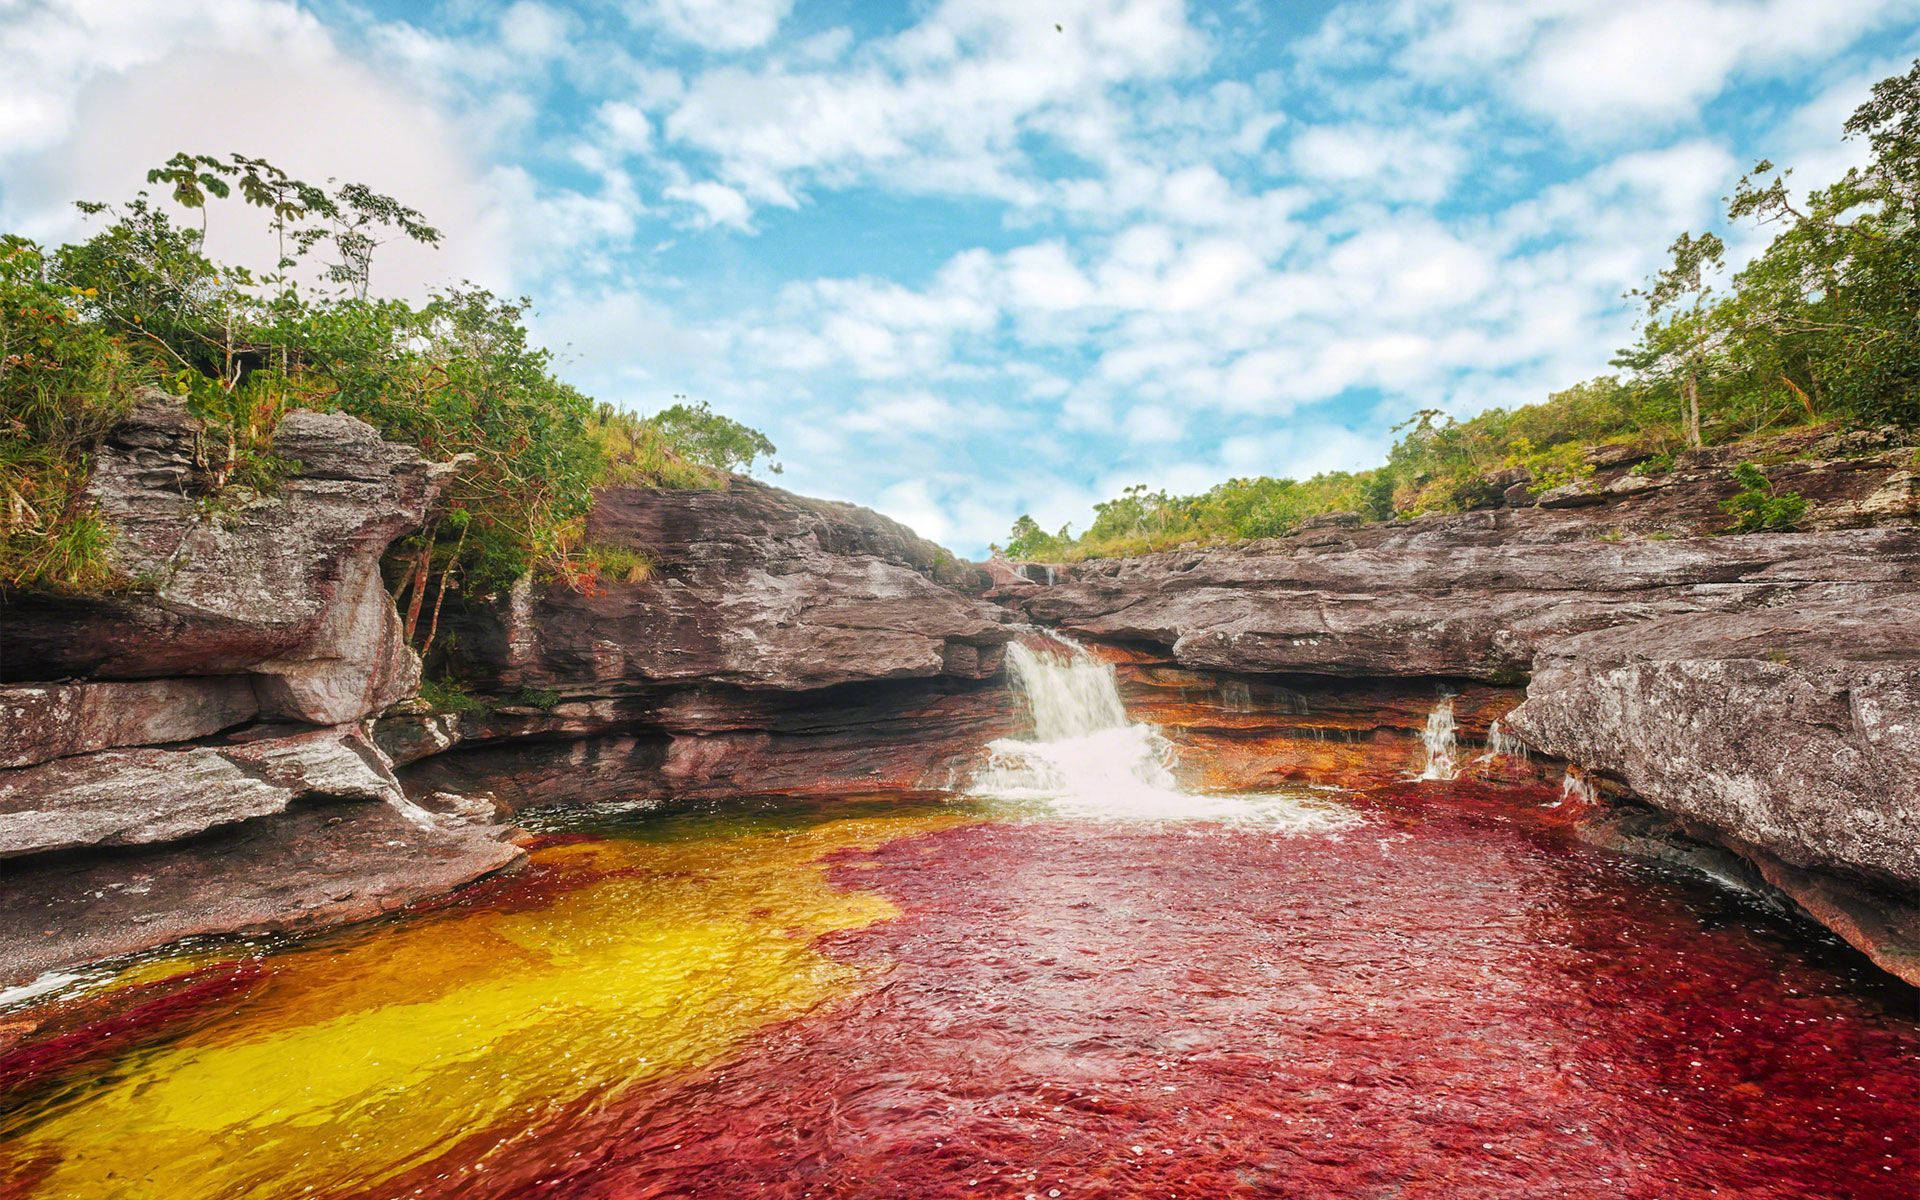 Caption: Breathtaking View Of Cano Cristales, The River Of Five Colors, In Colombia